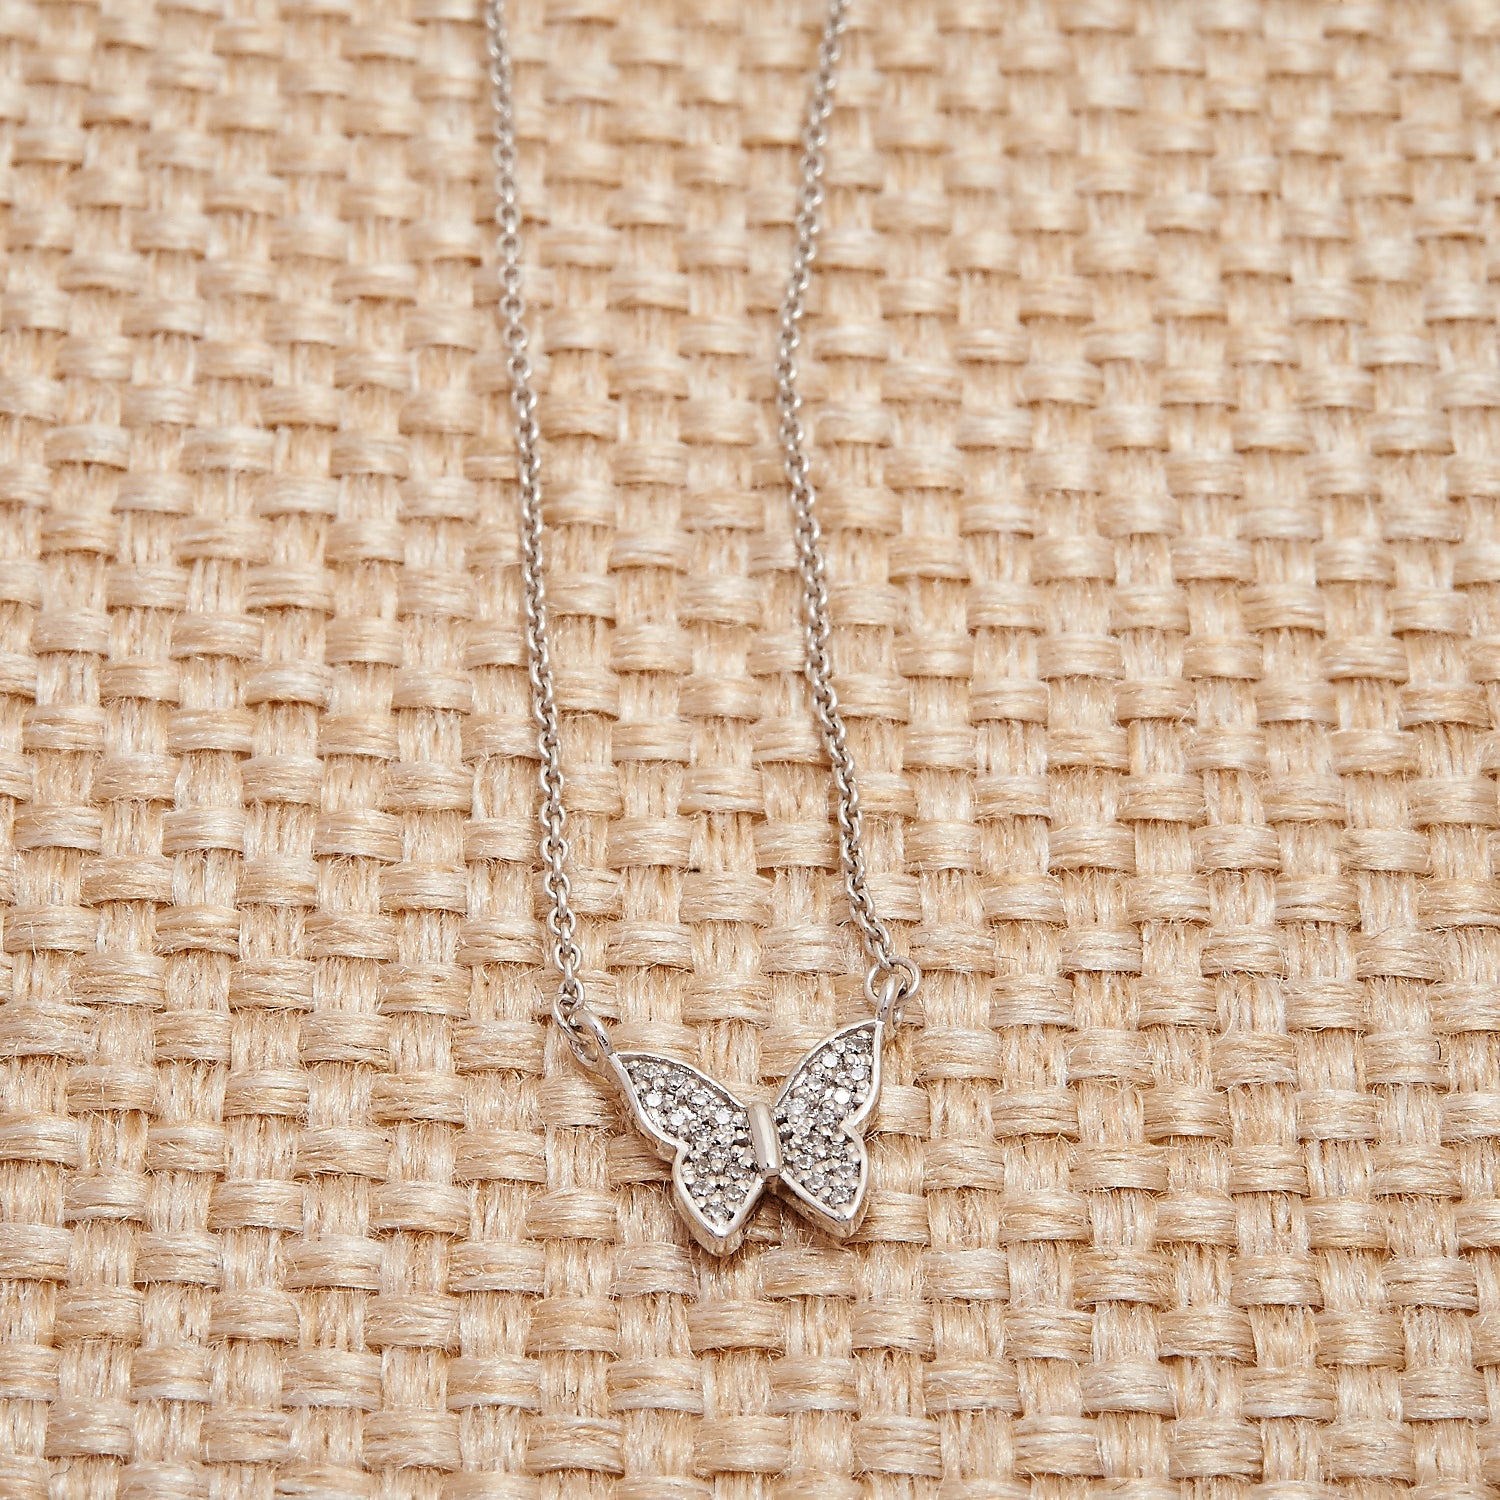 Papillon Butterfly Diamond Necklace in White Gold